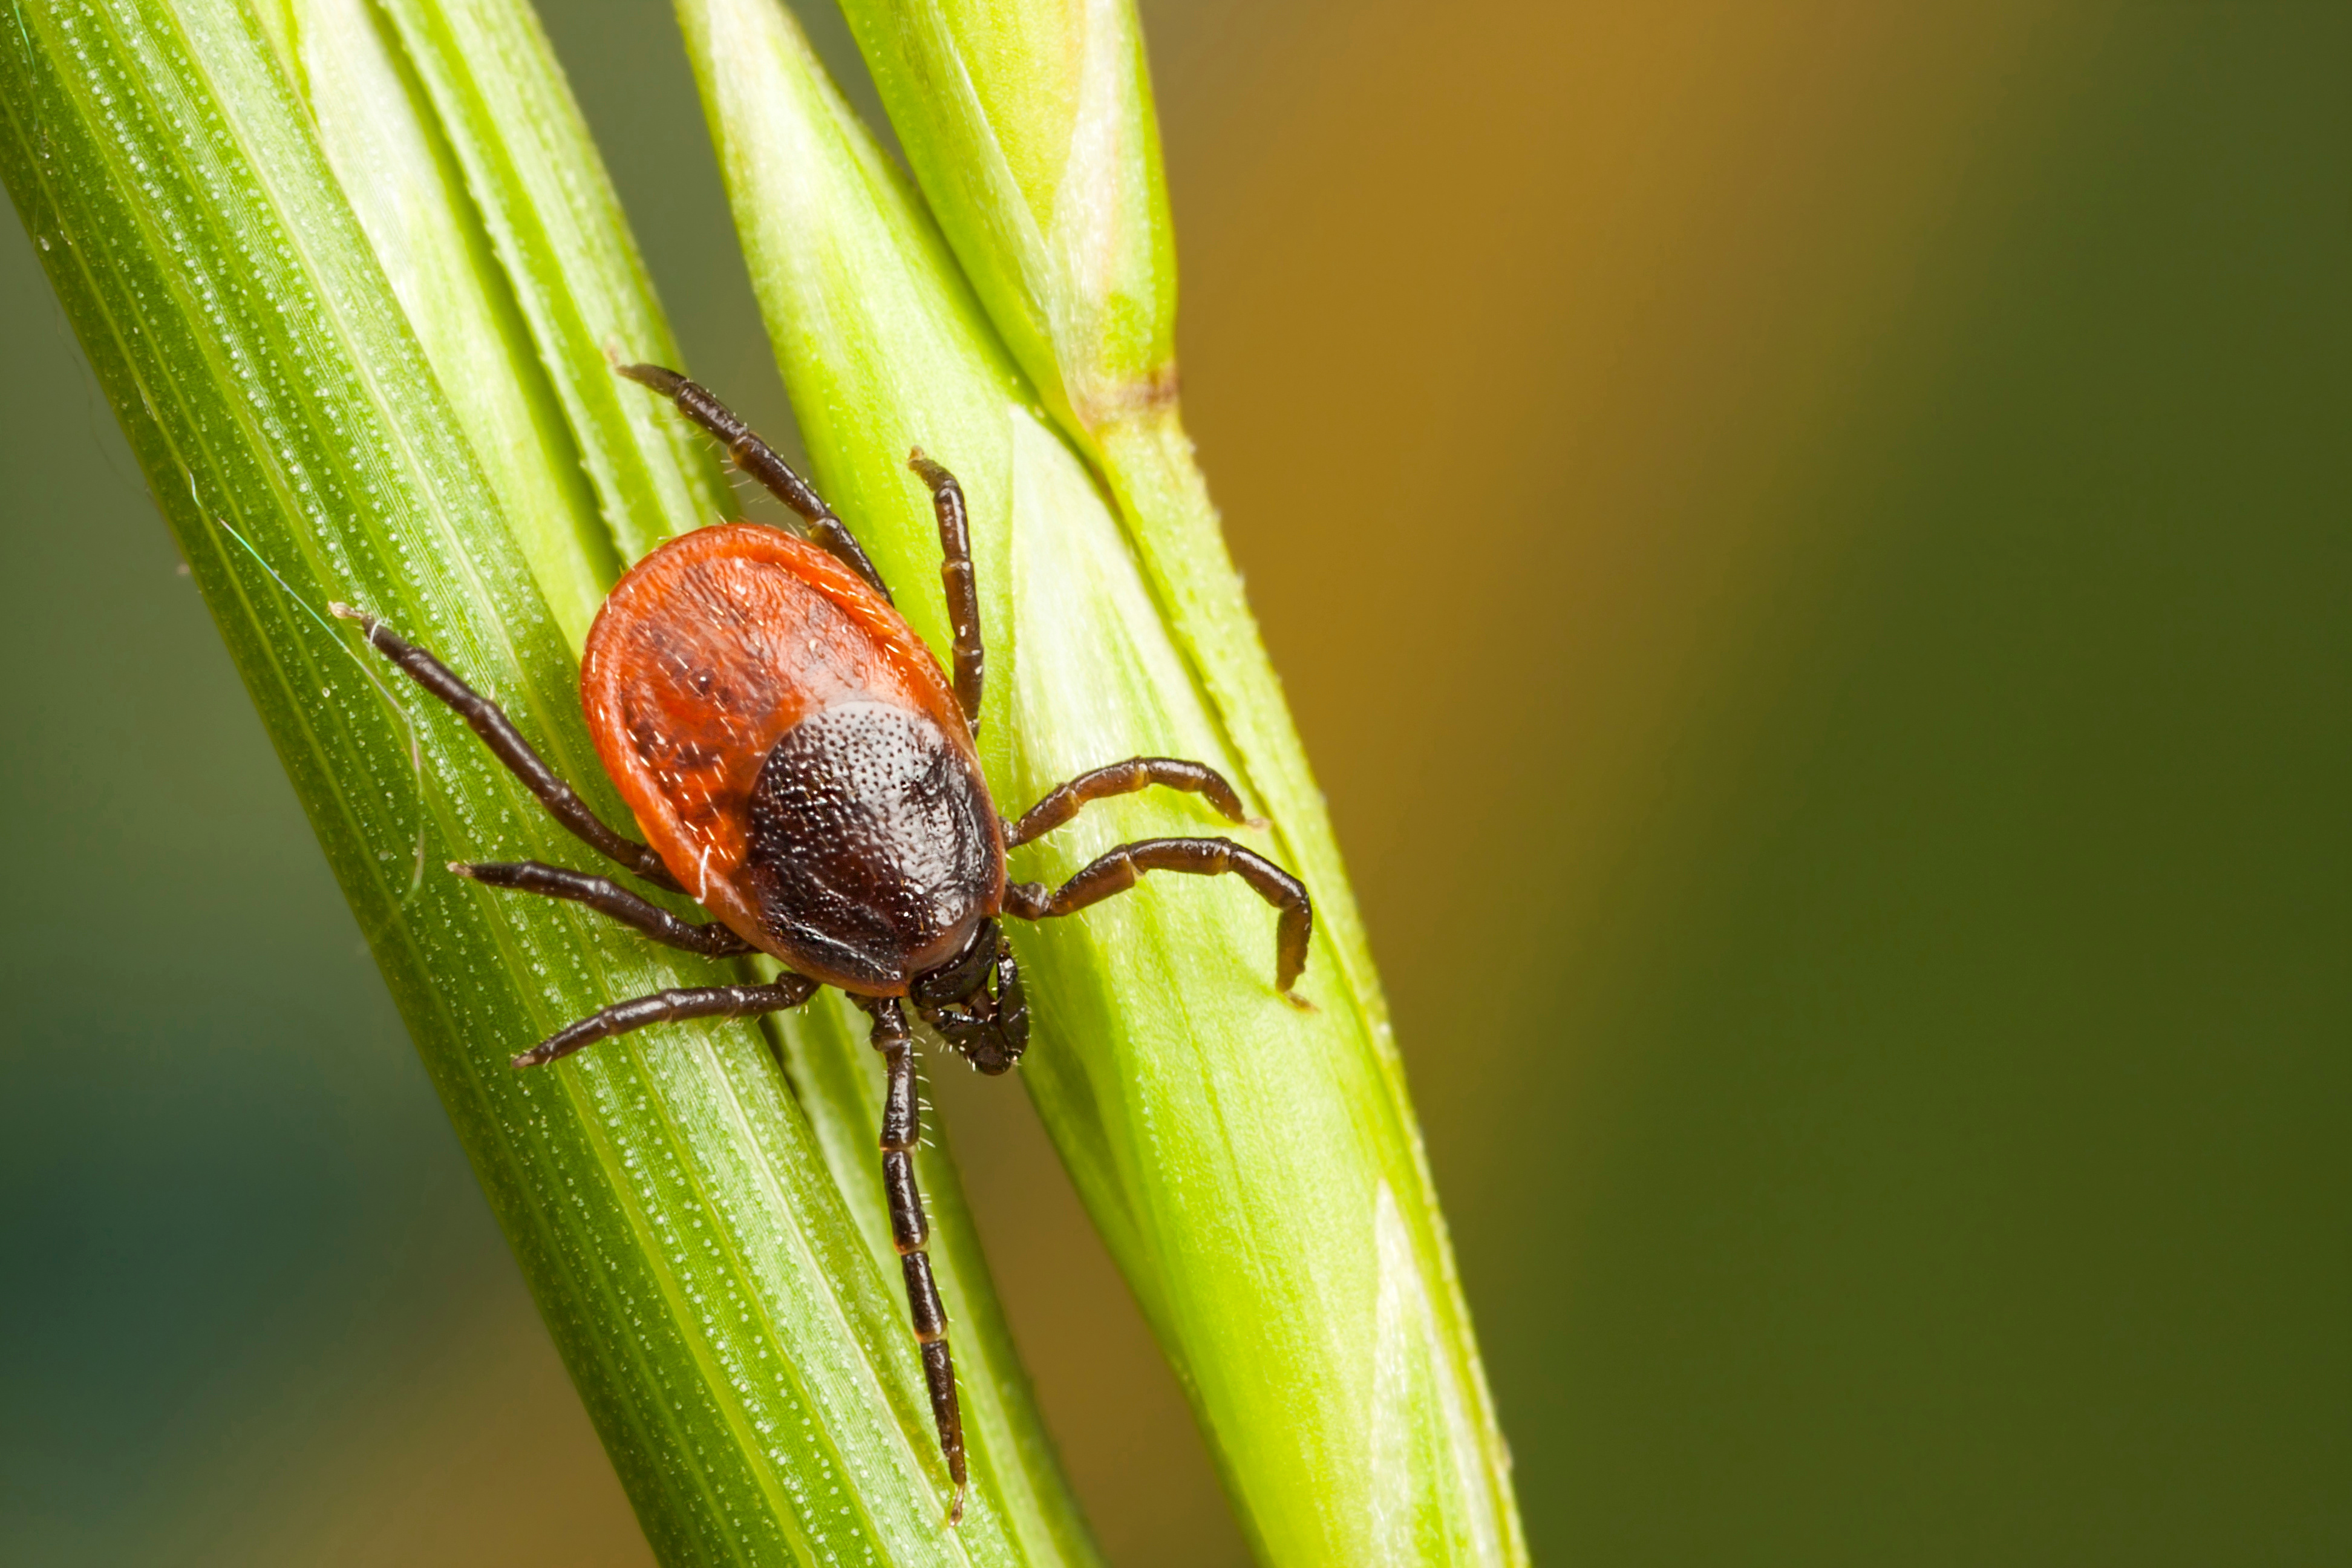 A tick on a leaf - do you need tick pest control in Killeen, TX? Contact GGA Pest Management Killeen today!